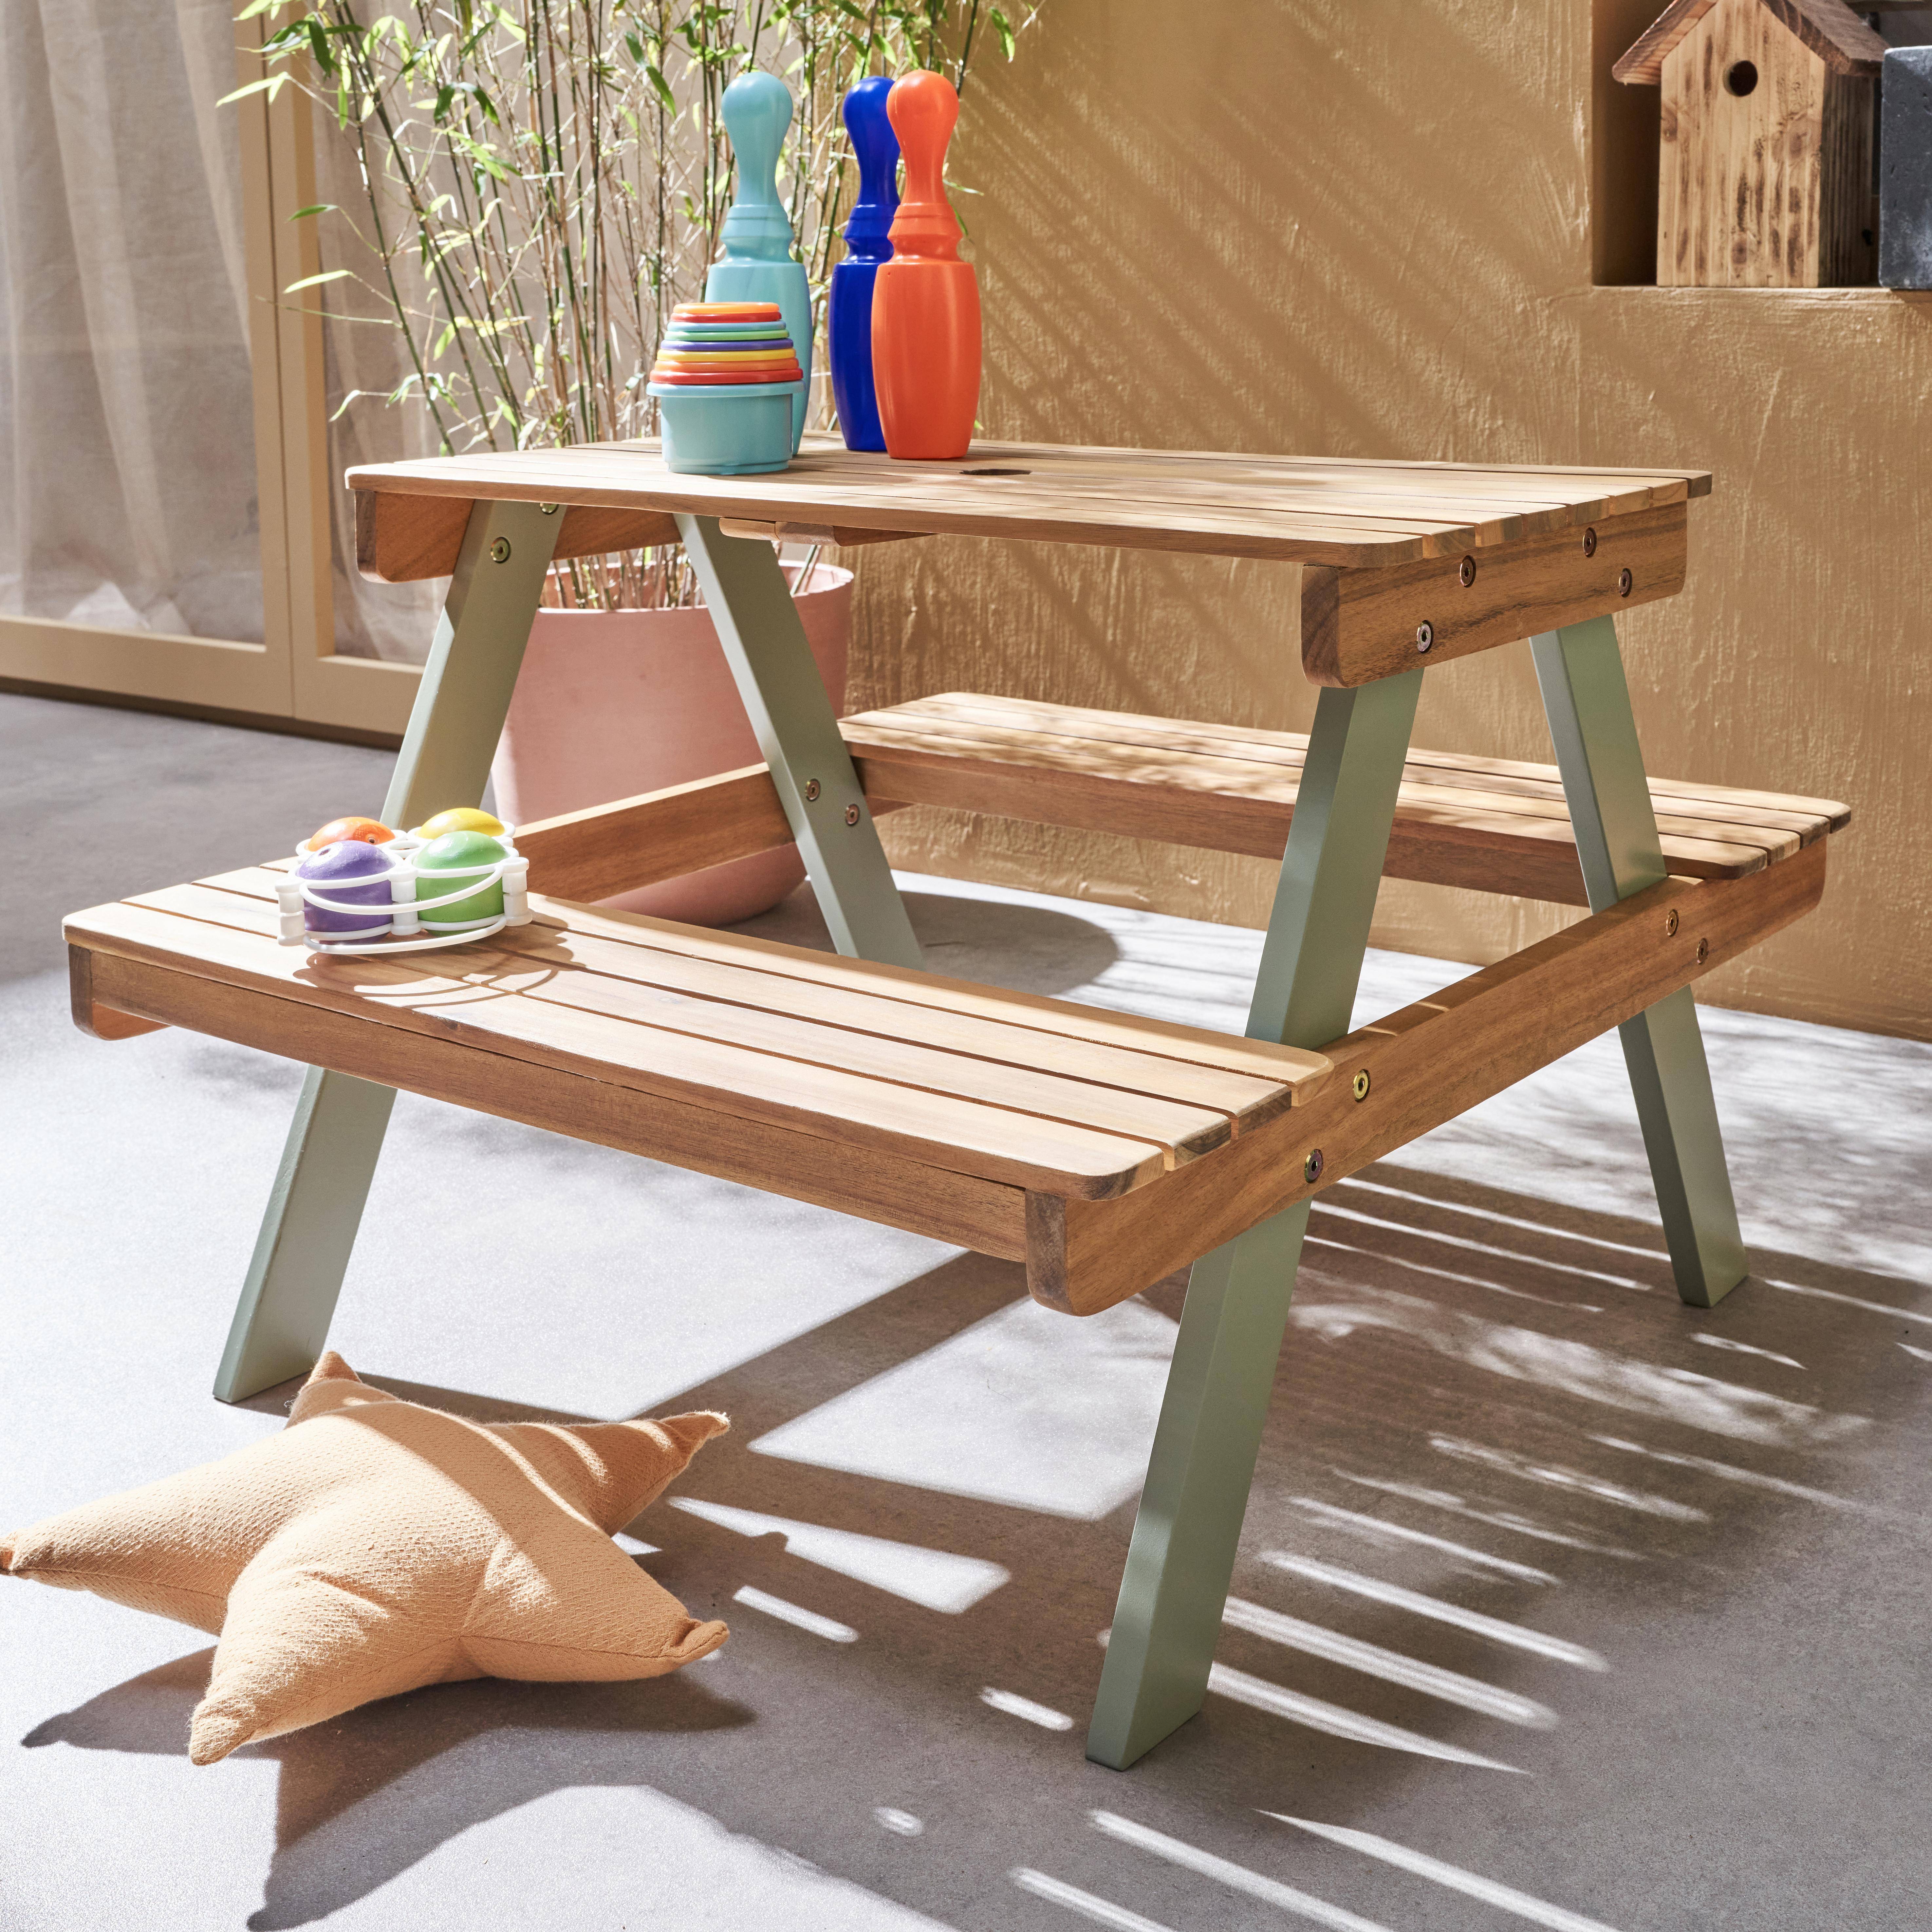 Acacia wood picnic table for children, 2 places, colour light teak and grey green,sweeek,Photo2